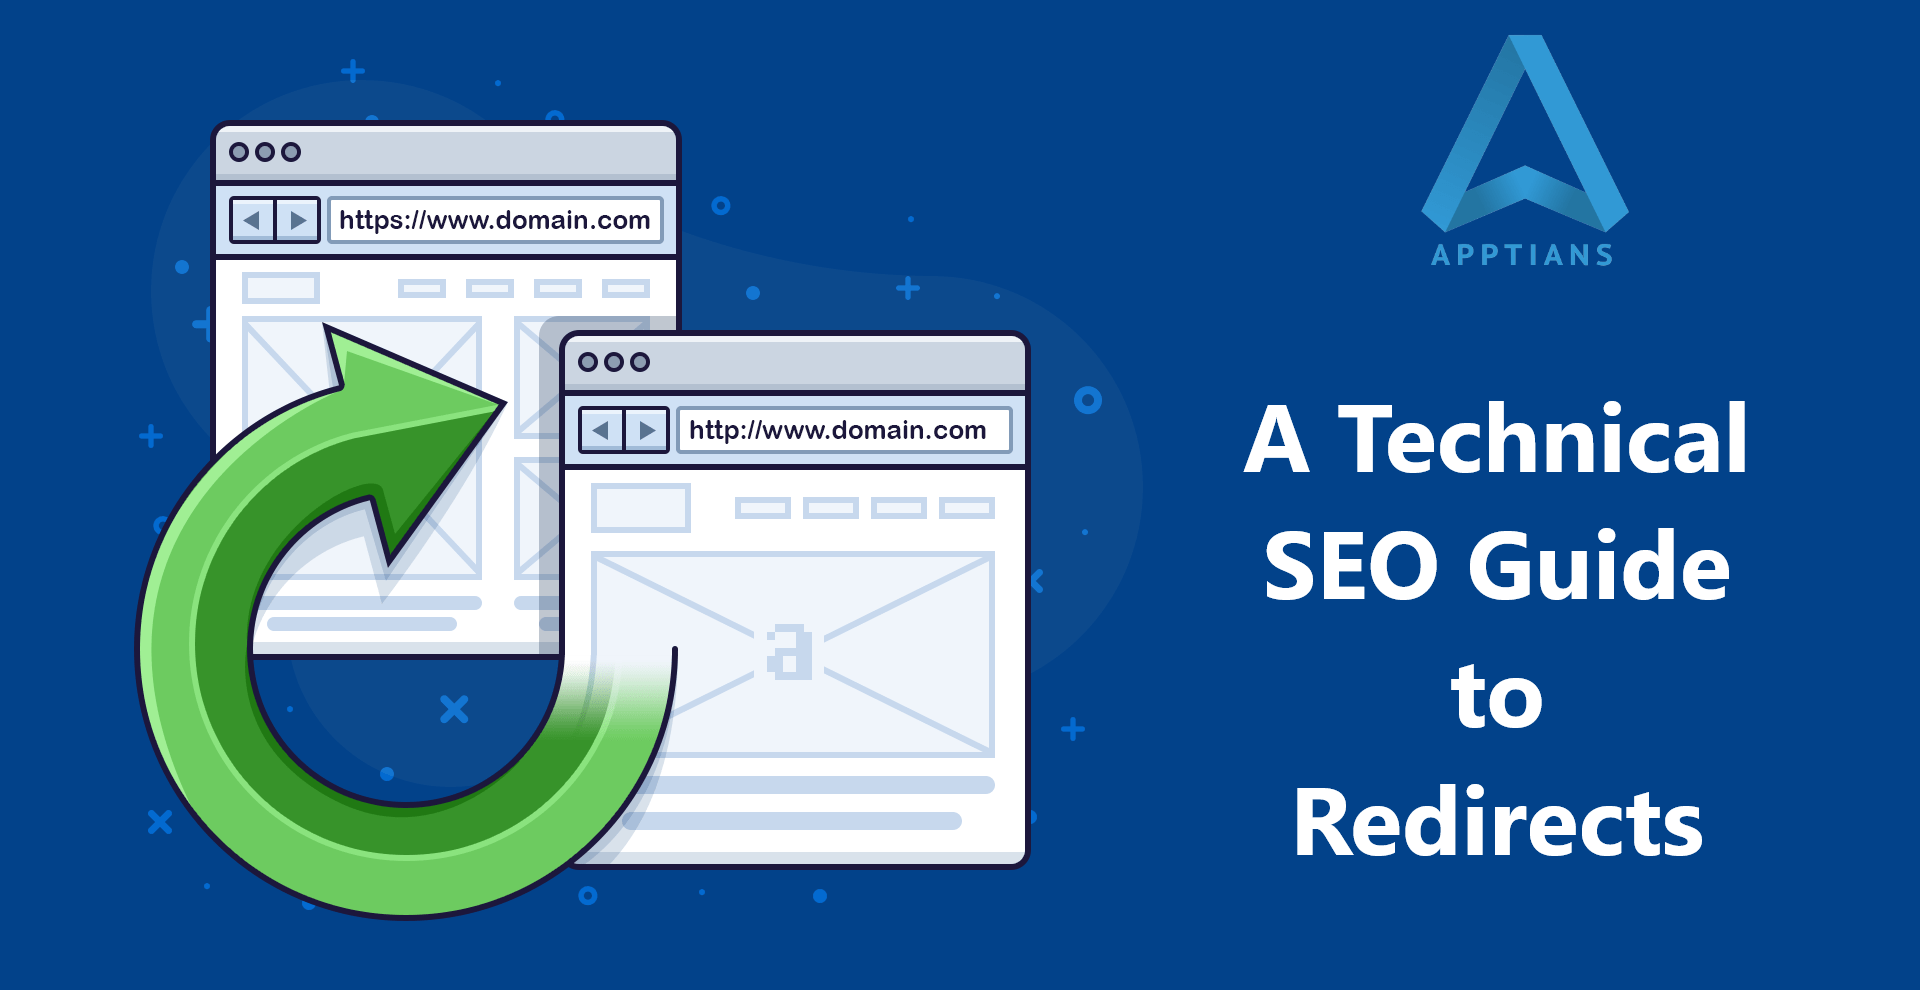 A Technical SEO Guide to Redirects